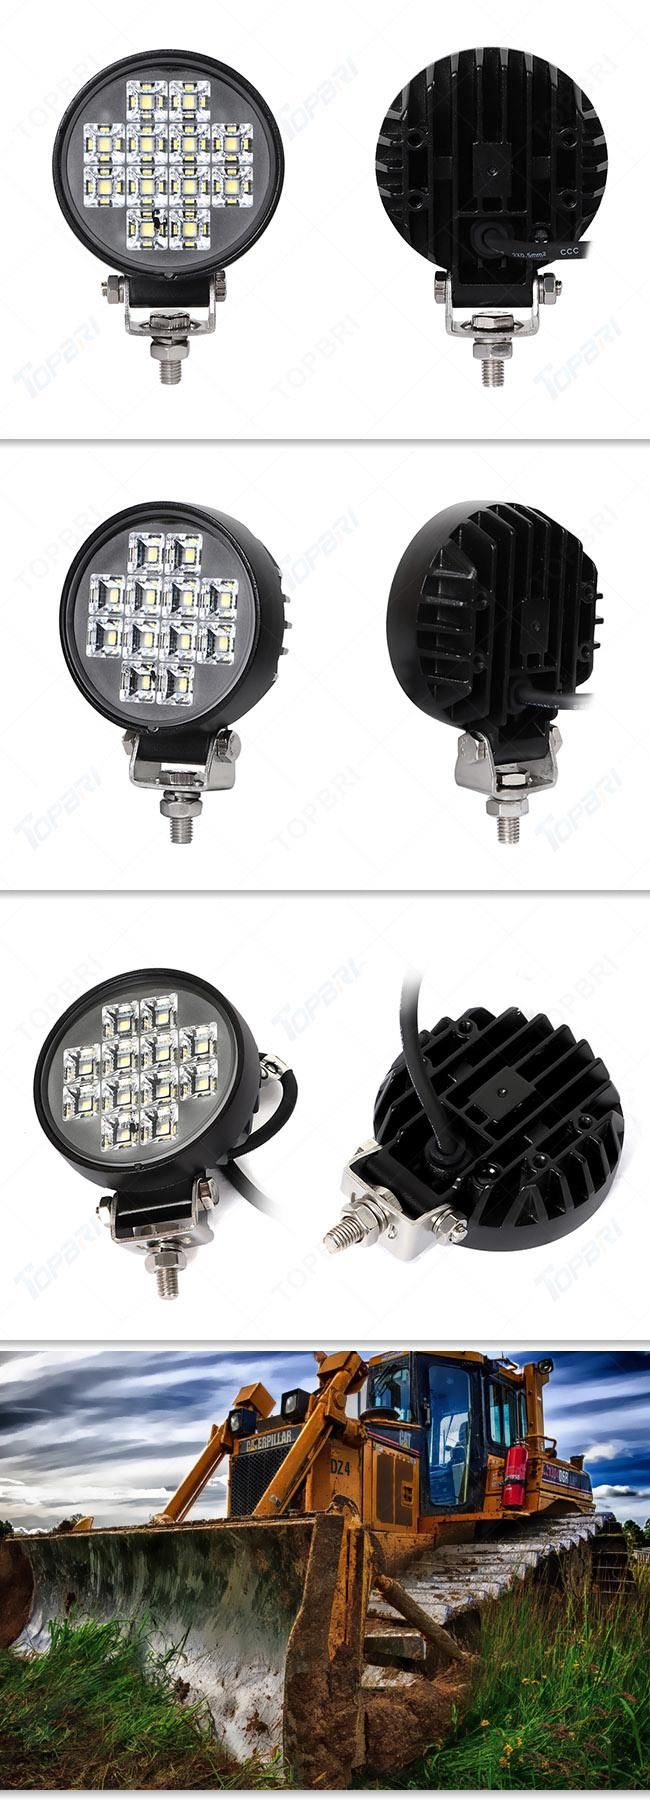 12V Portable Round Osram LED Work Motorcycle Light for Auto Construction Trailer Truck